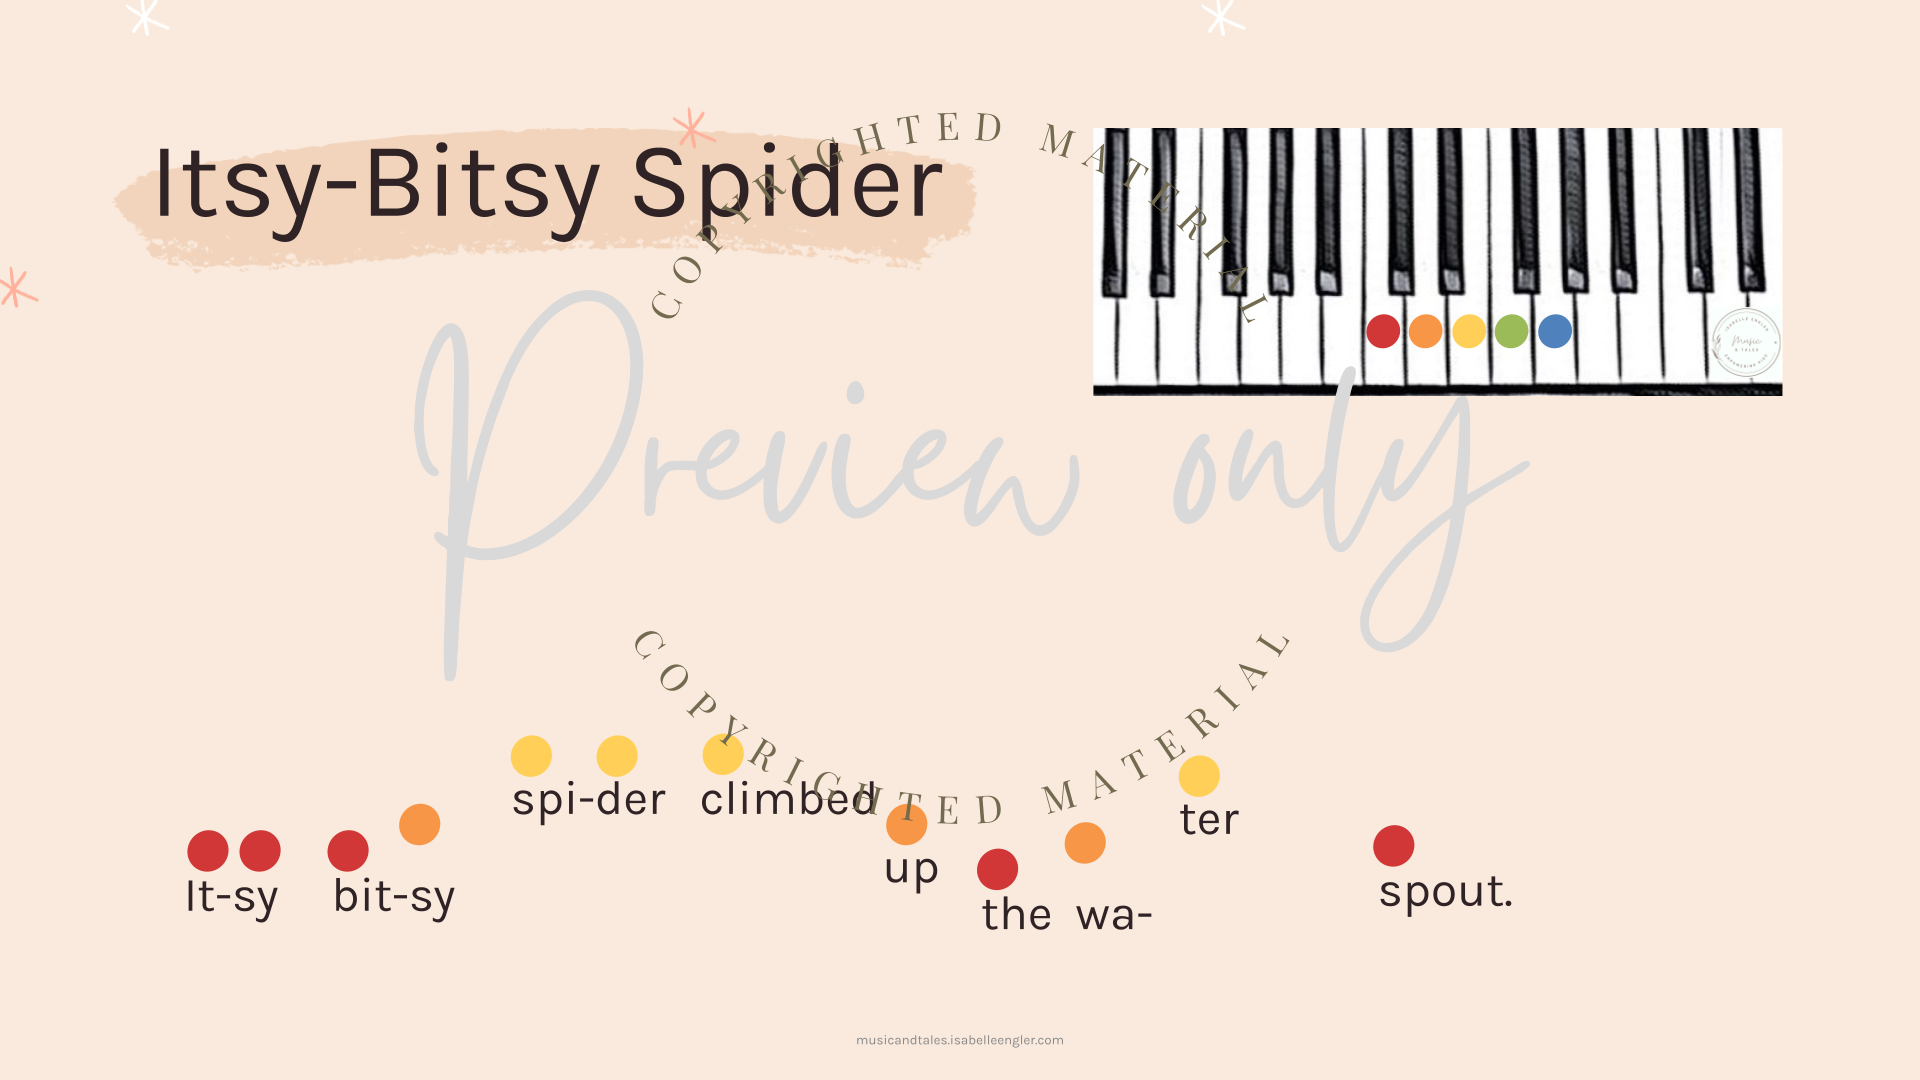 Song Board - Itsy Bitsy Spider